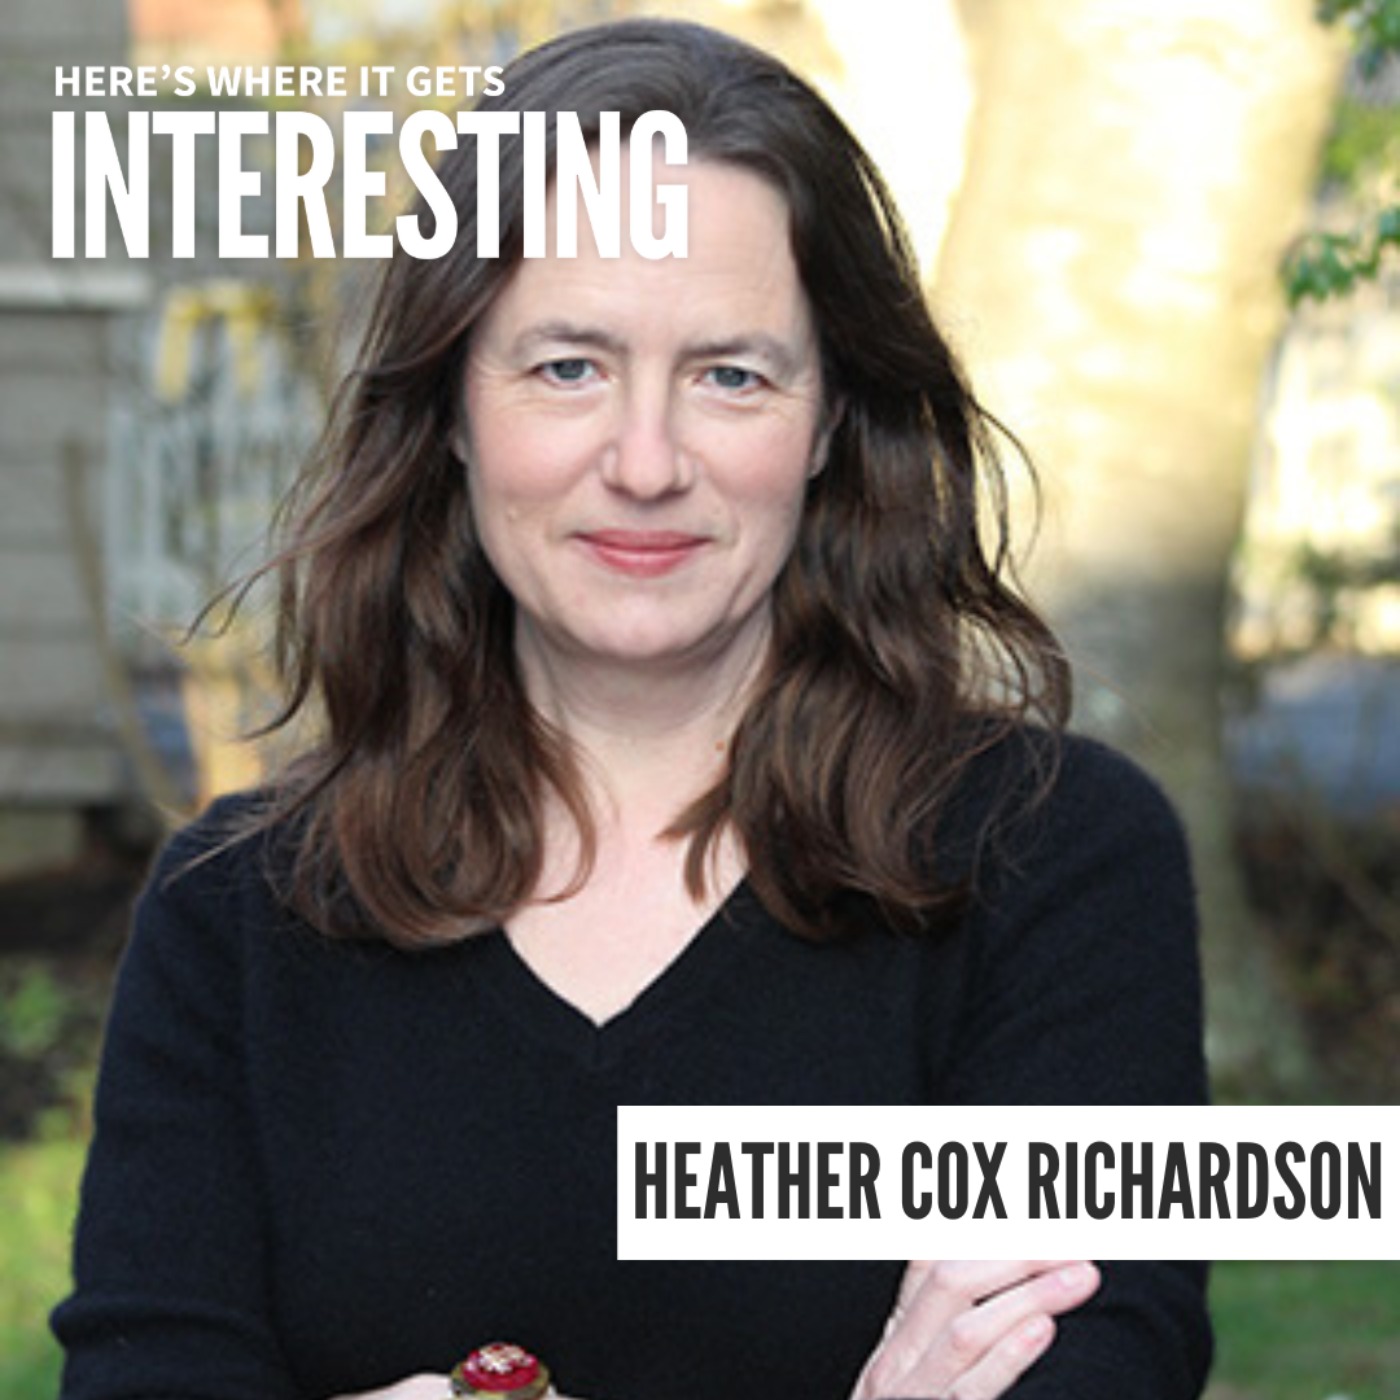 How the Future Shapes Our National History with Heather Cox Richardson